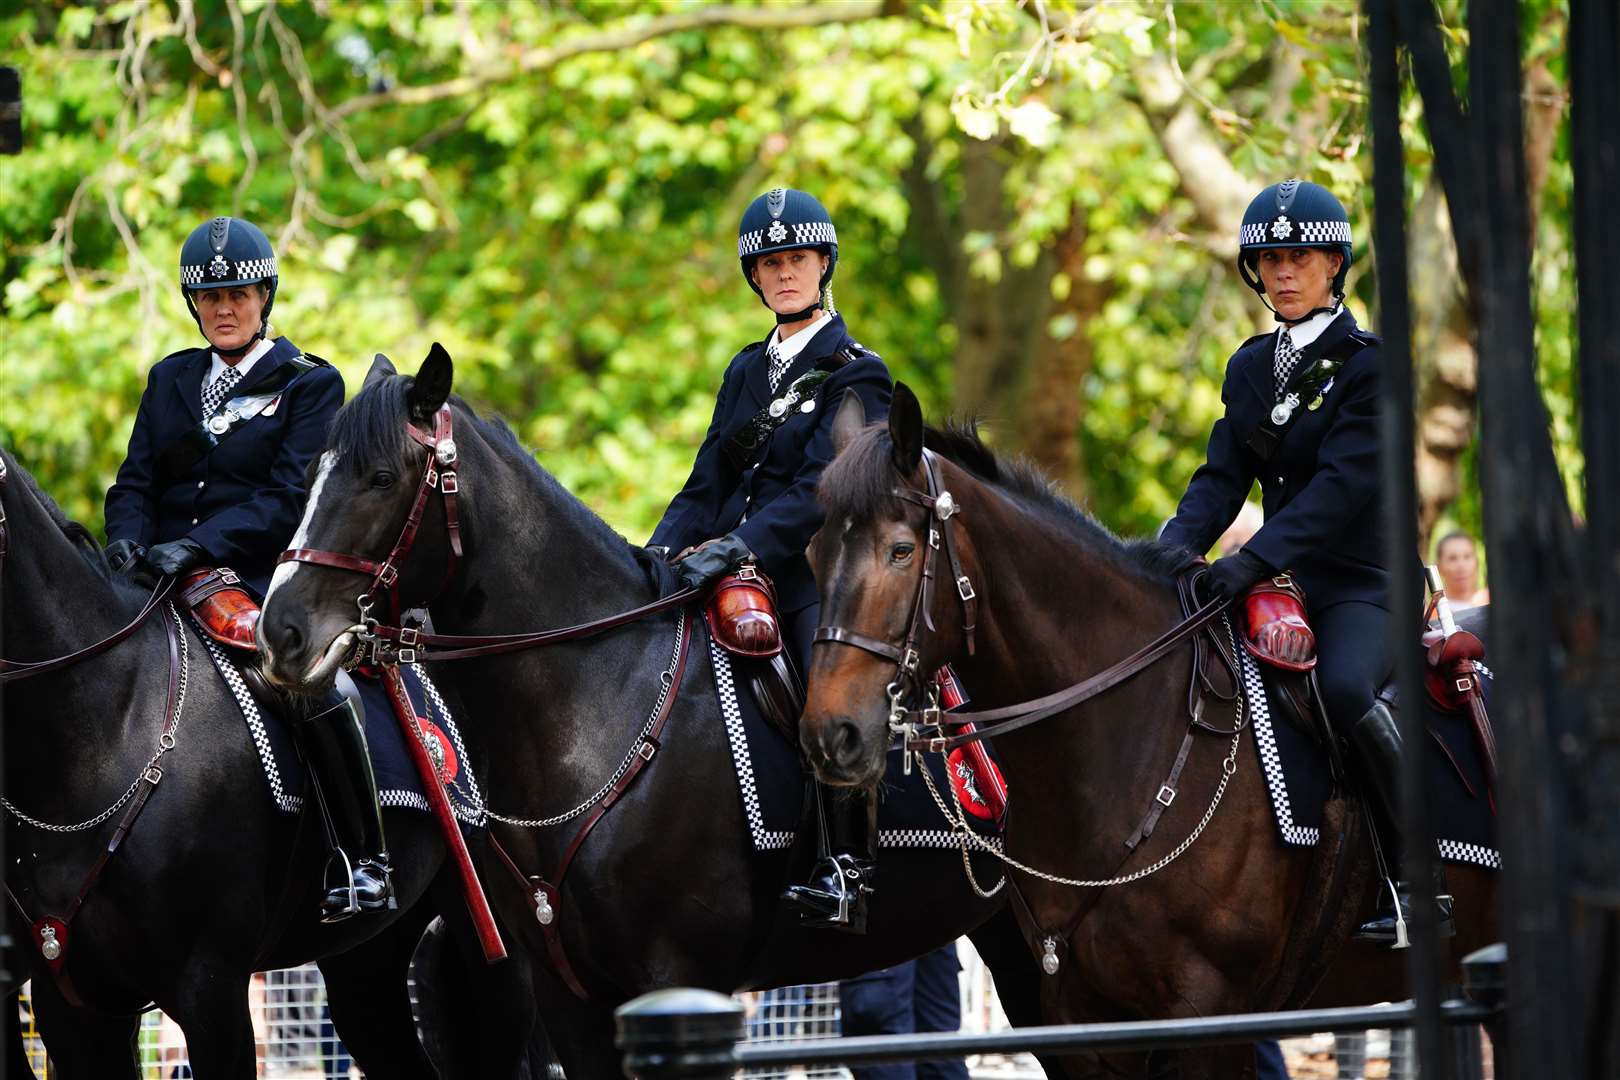 Mounted police were among specialist teams being deployed as part of the operation (Ben Birchall/PA)